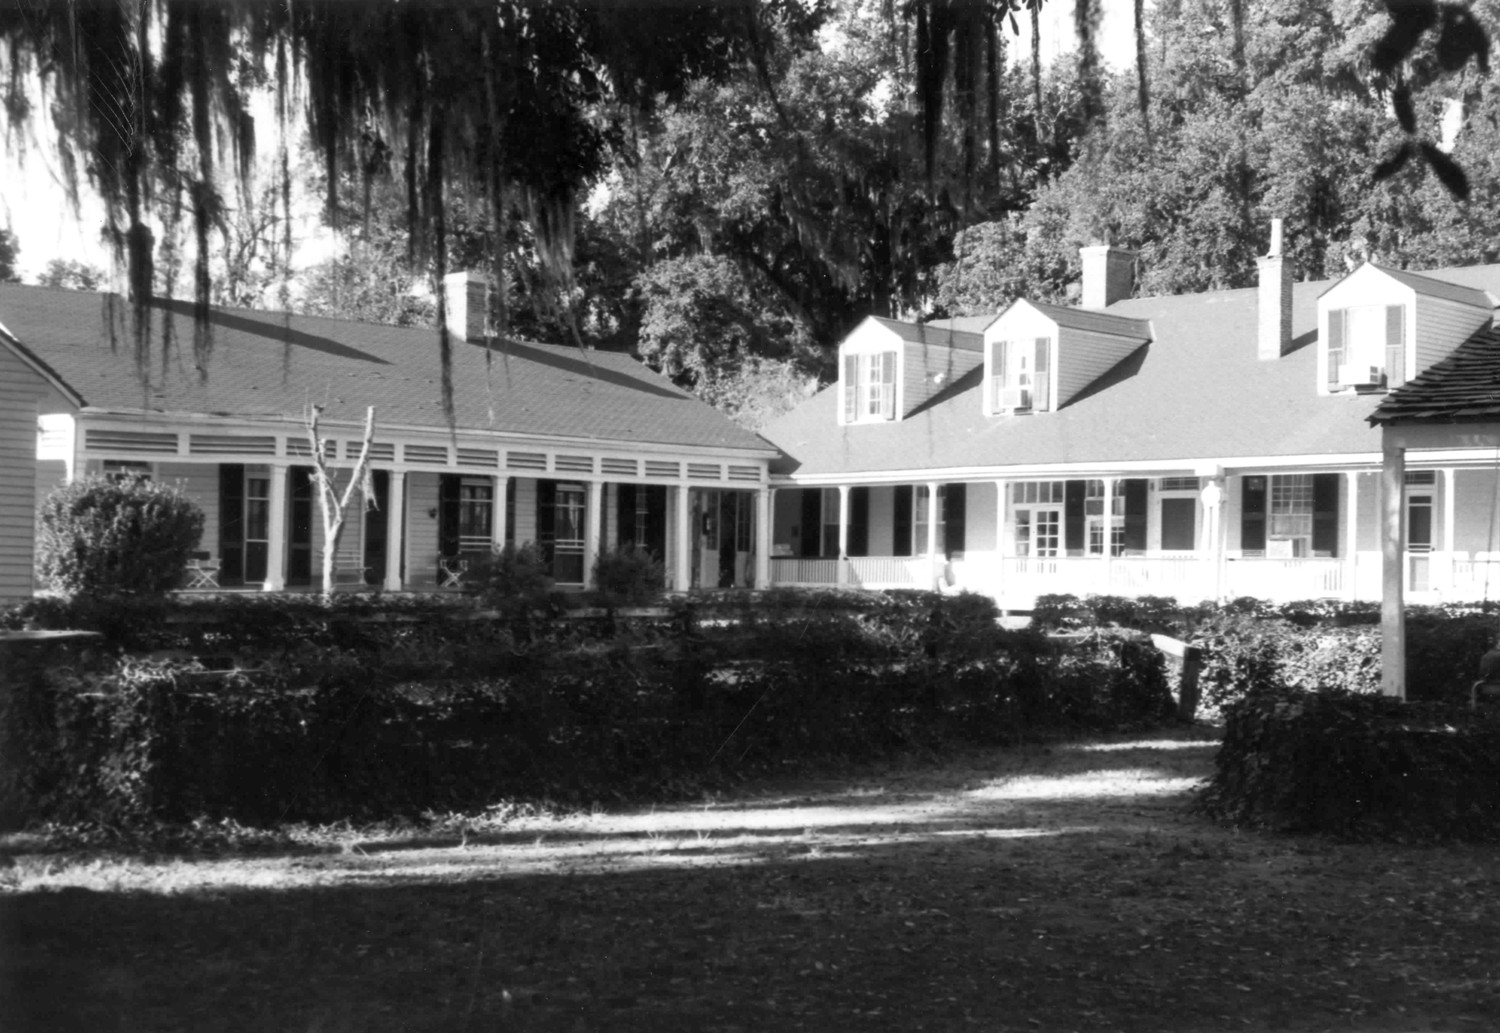 Cottage Plantation, St. Francisville Louisiana View of South side of residence and front side view of wing. Illustrates connection of the two buildings (1973)